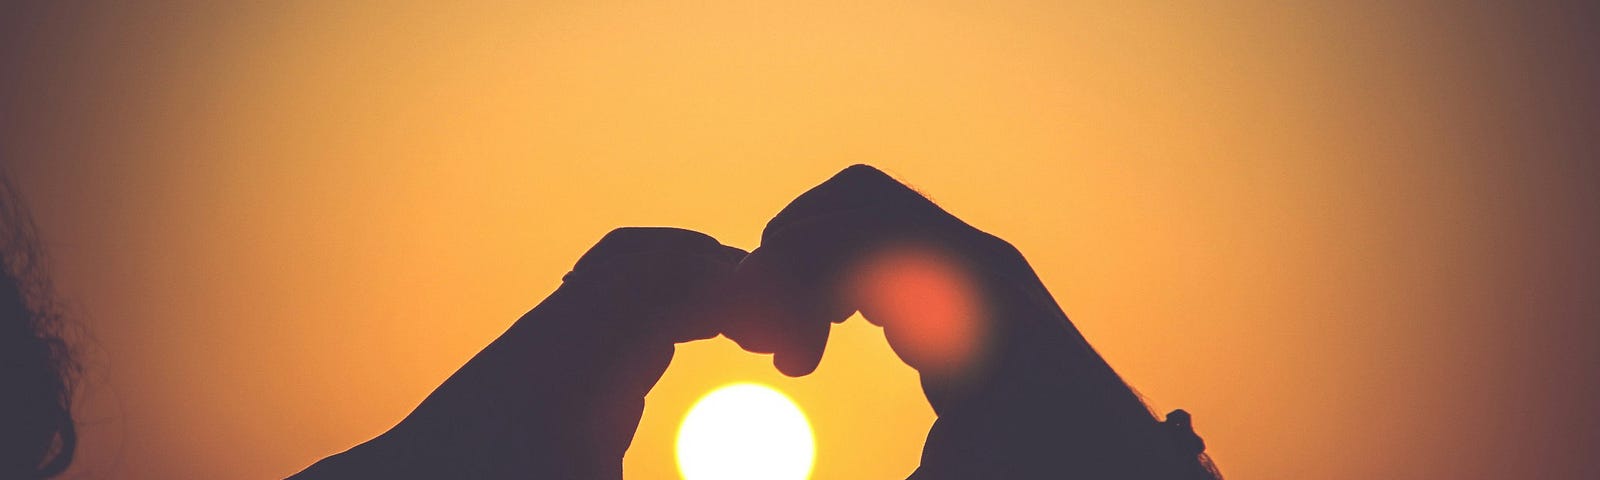 Heart shape made with hands around sun setting in the distance of a horizon